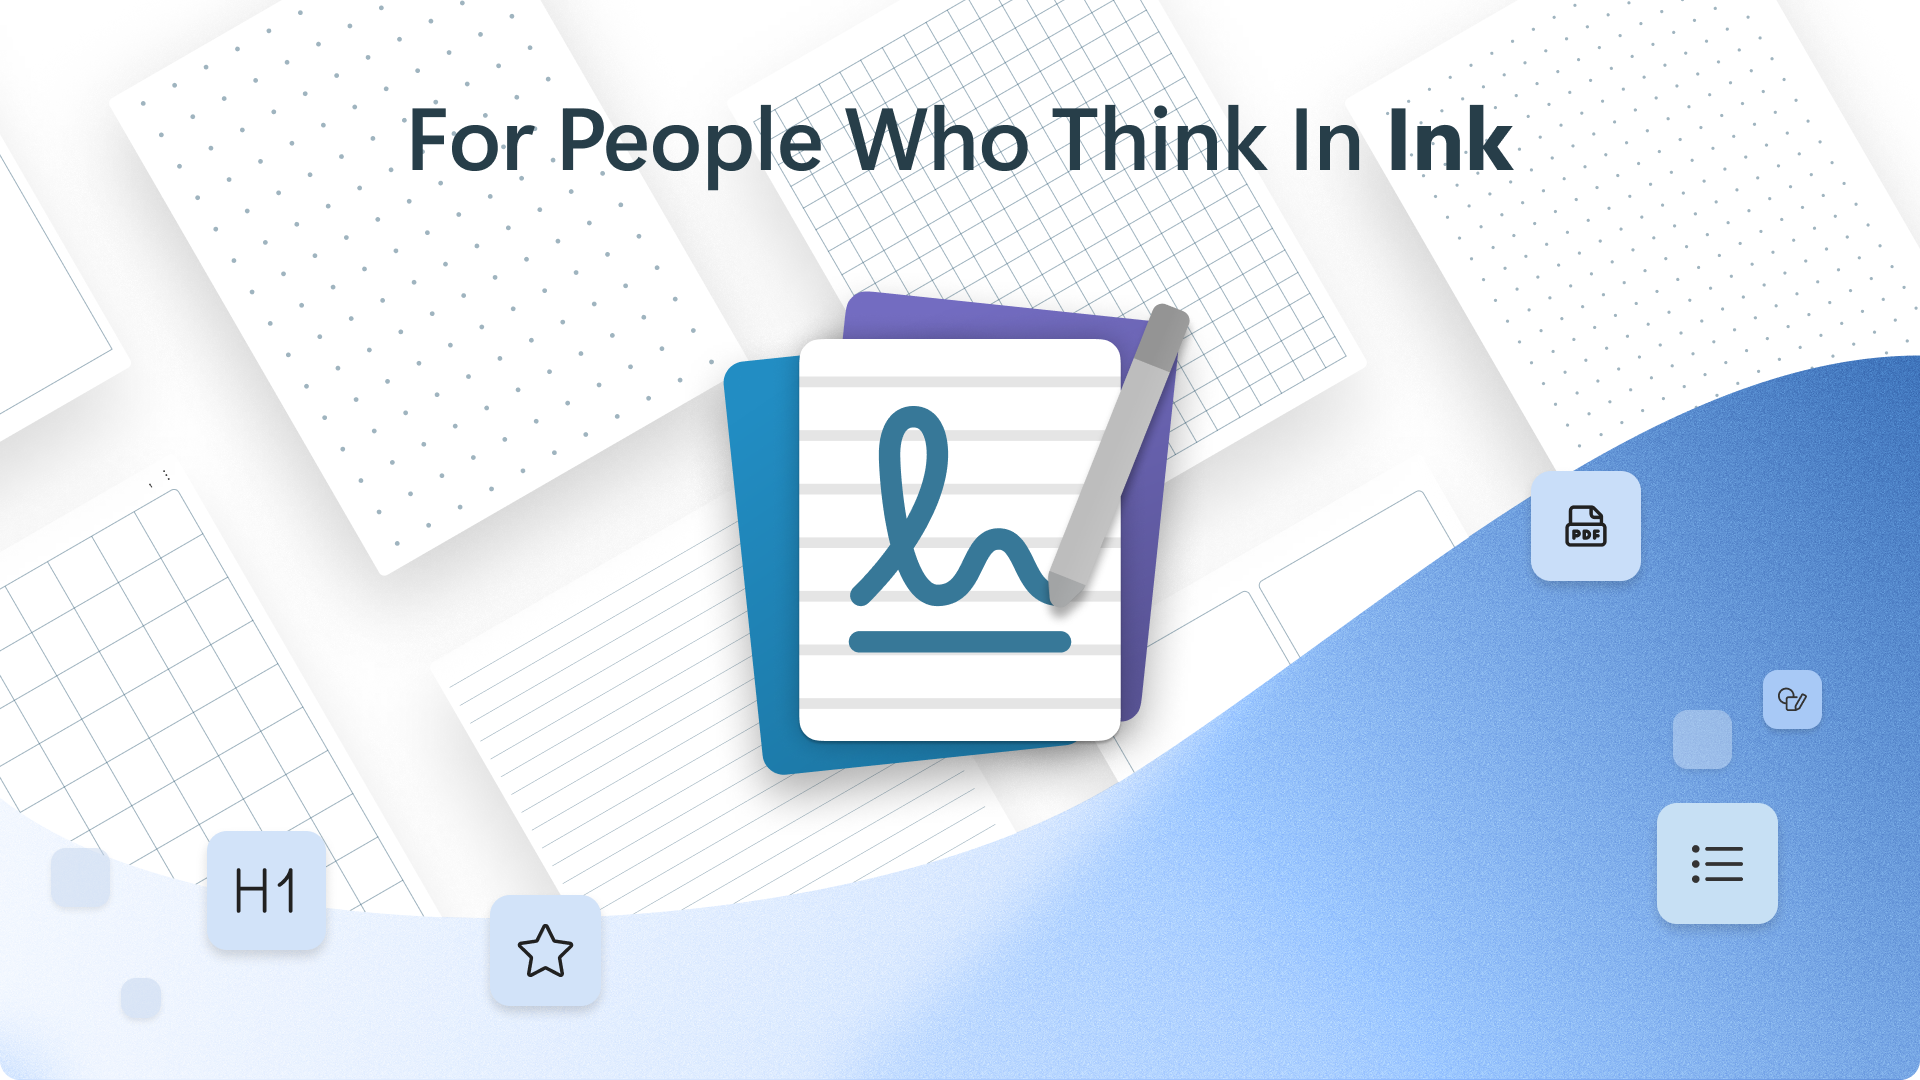 Journal logo with text "For people who think in ink"